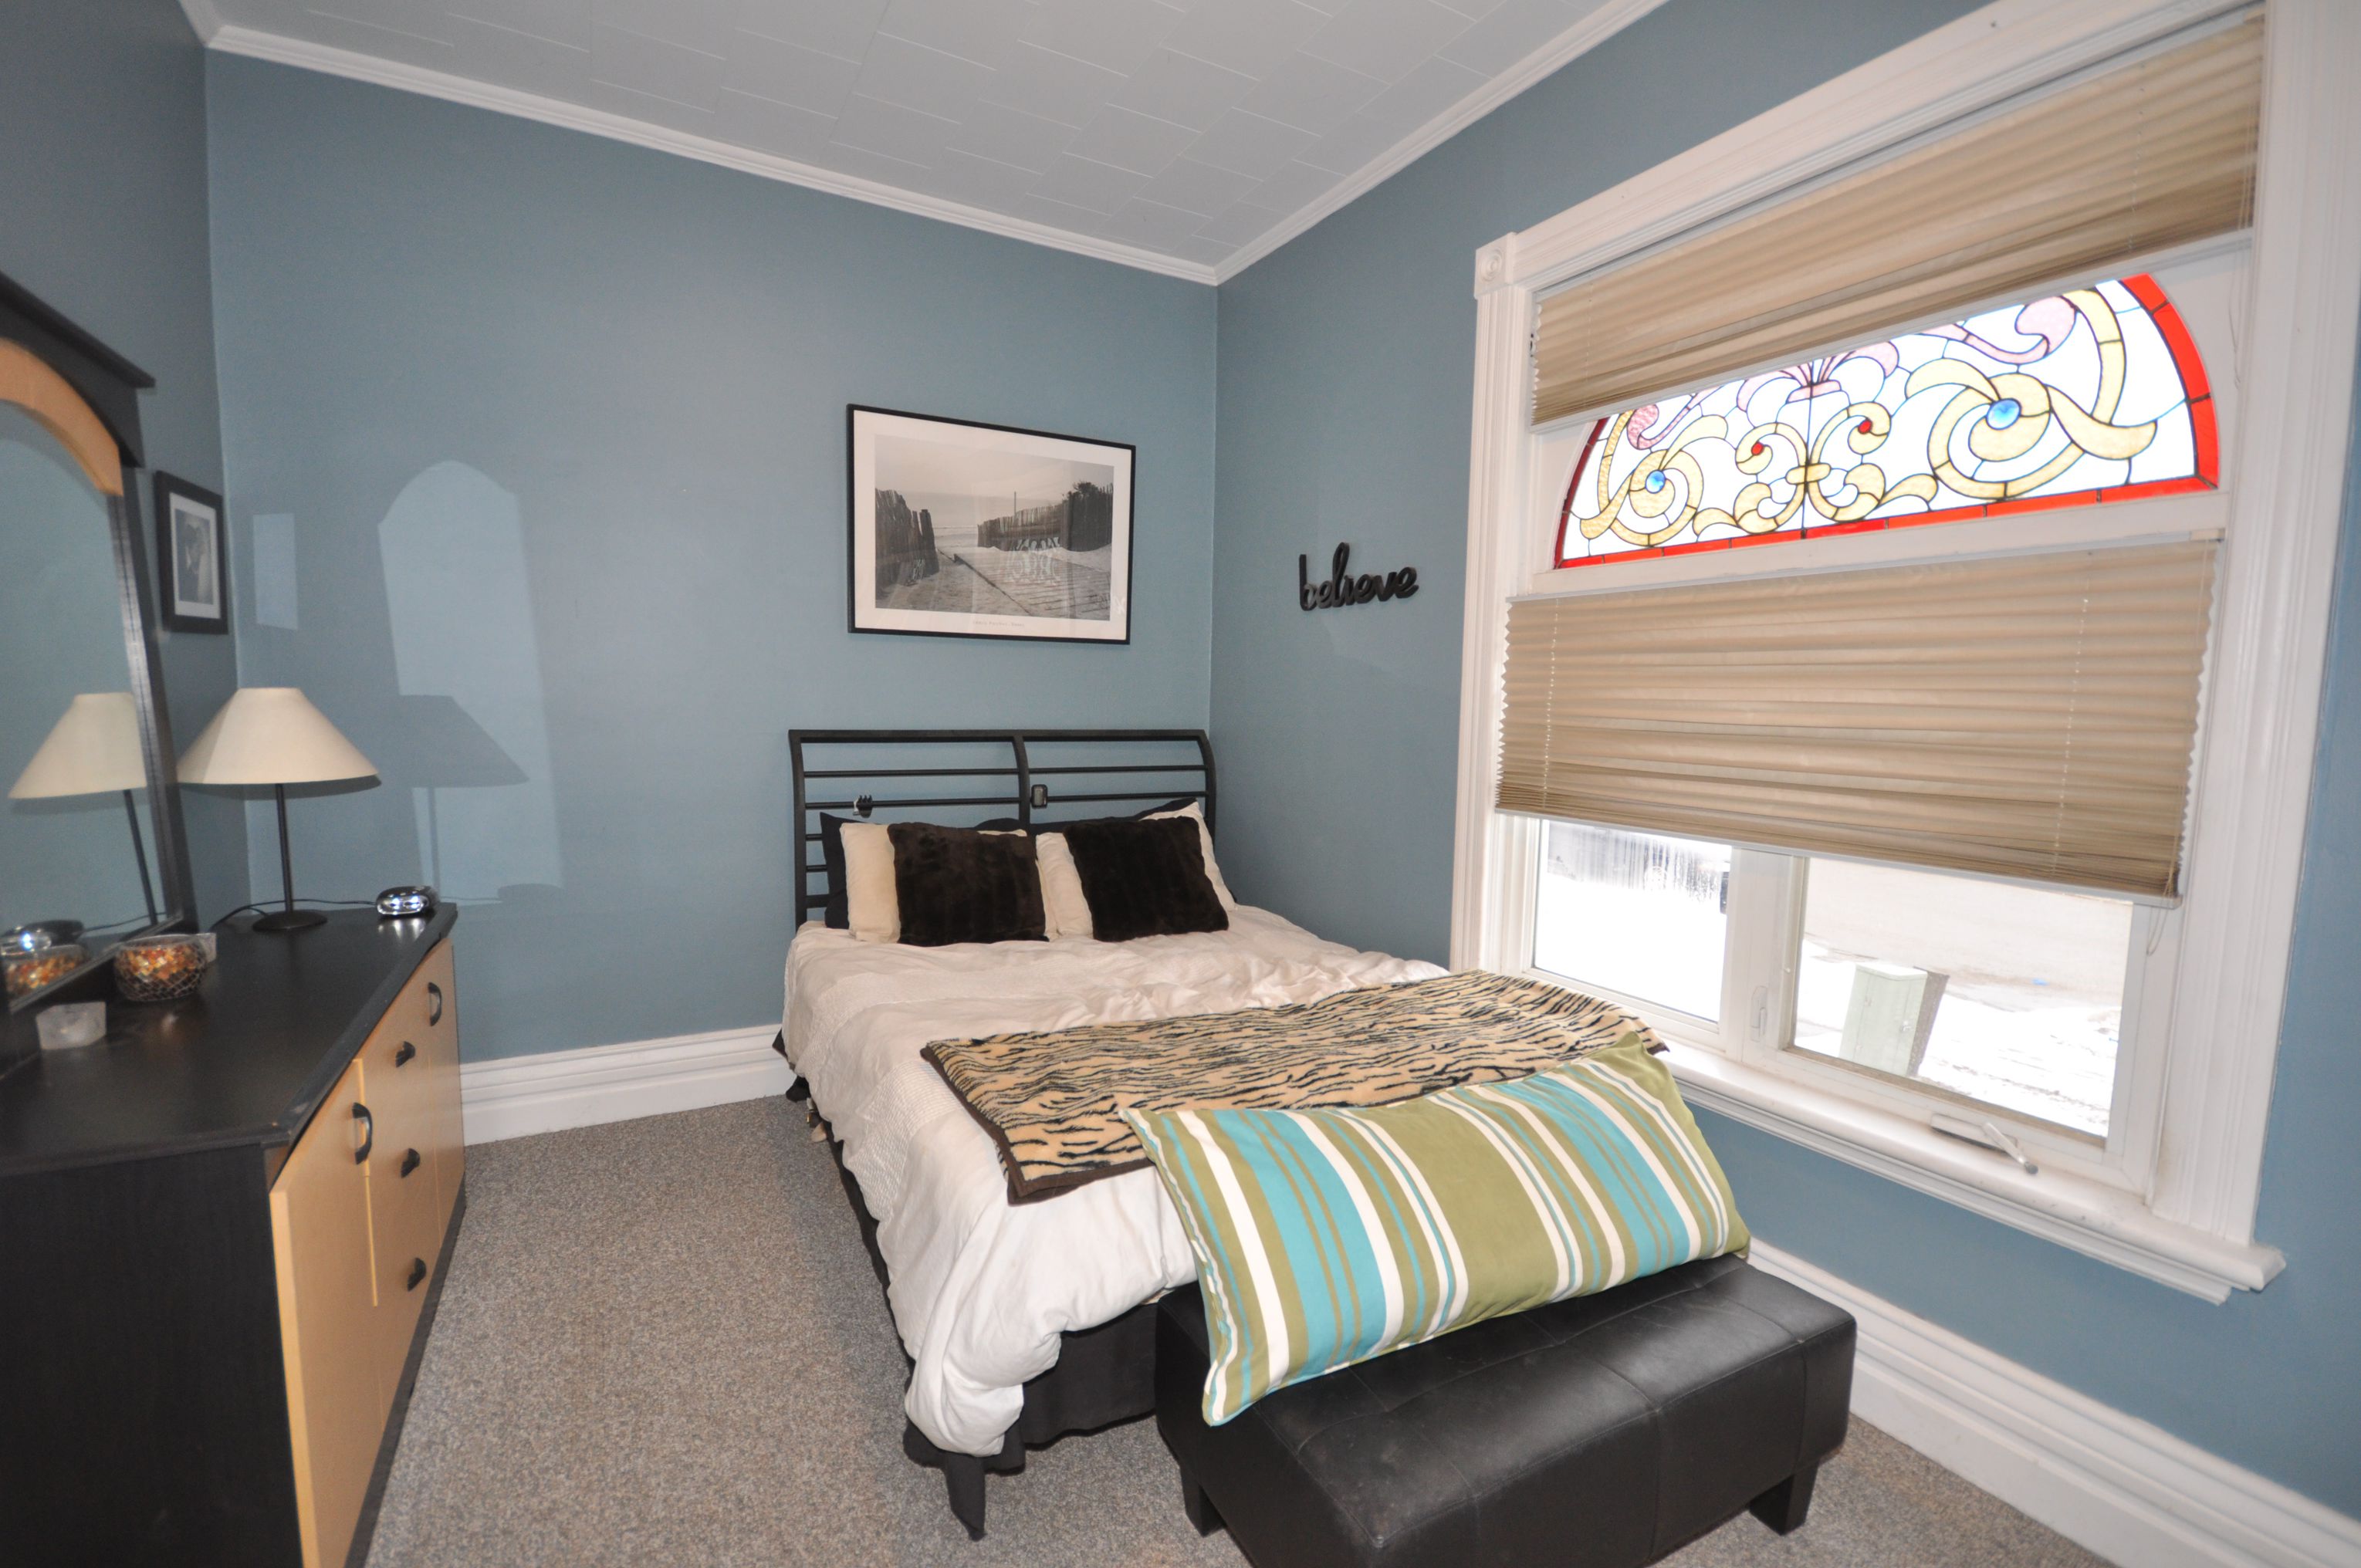 Master bedroom with stained glass window